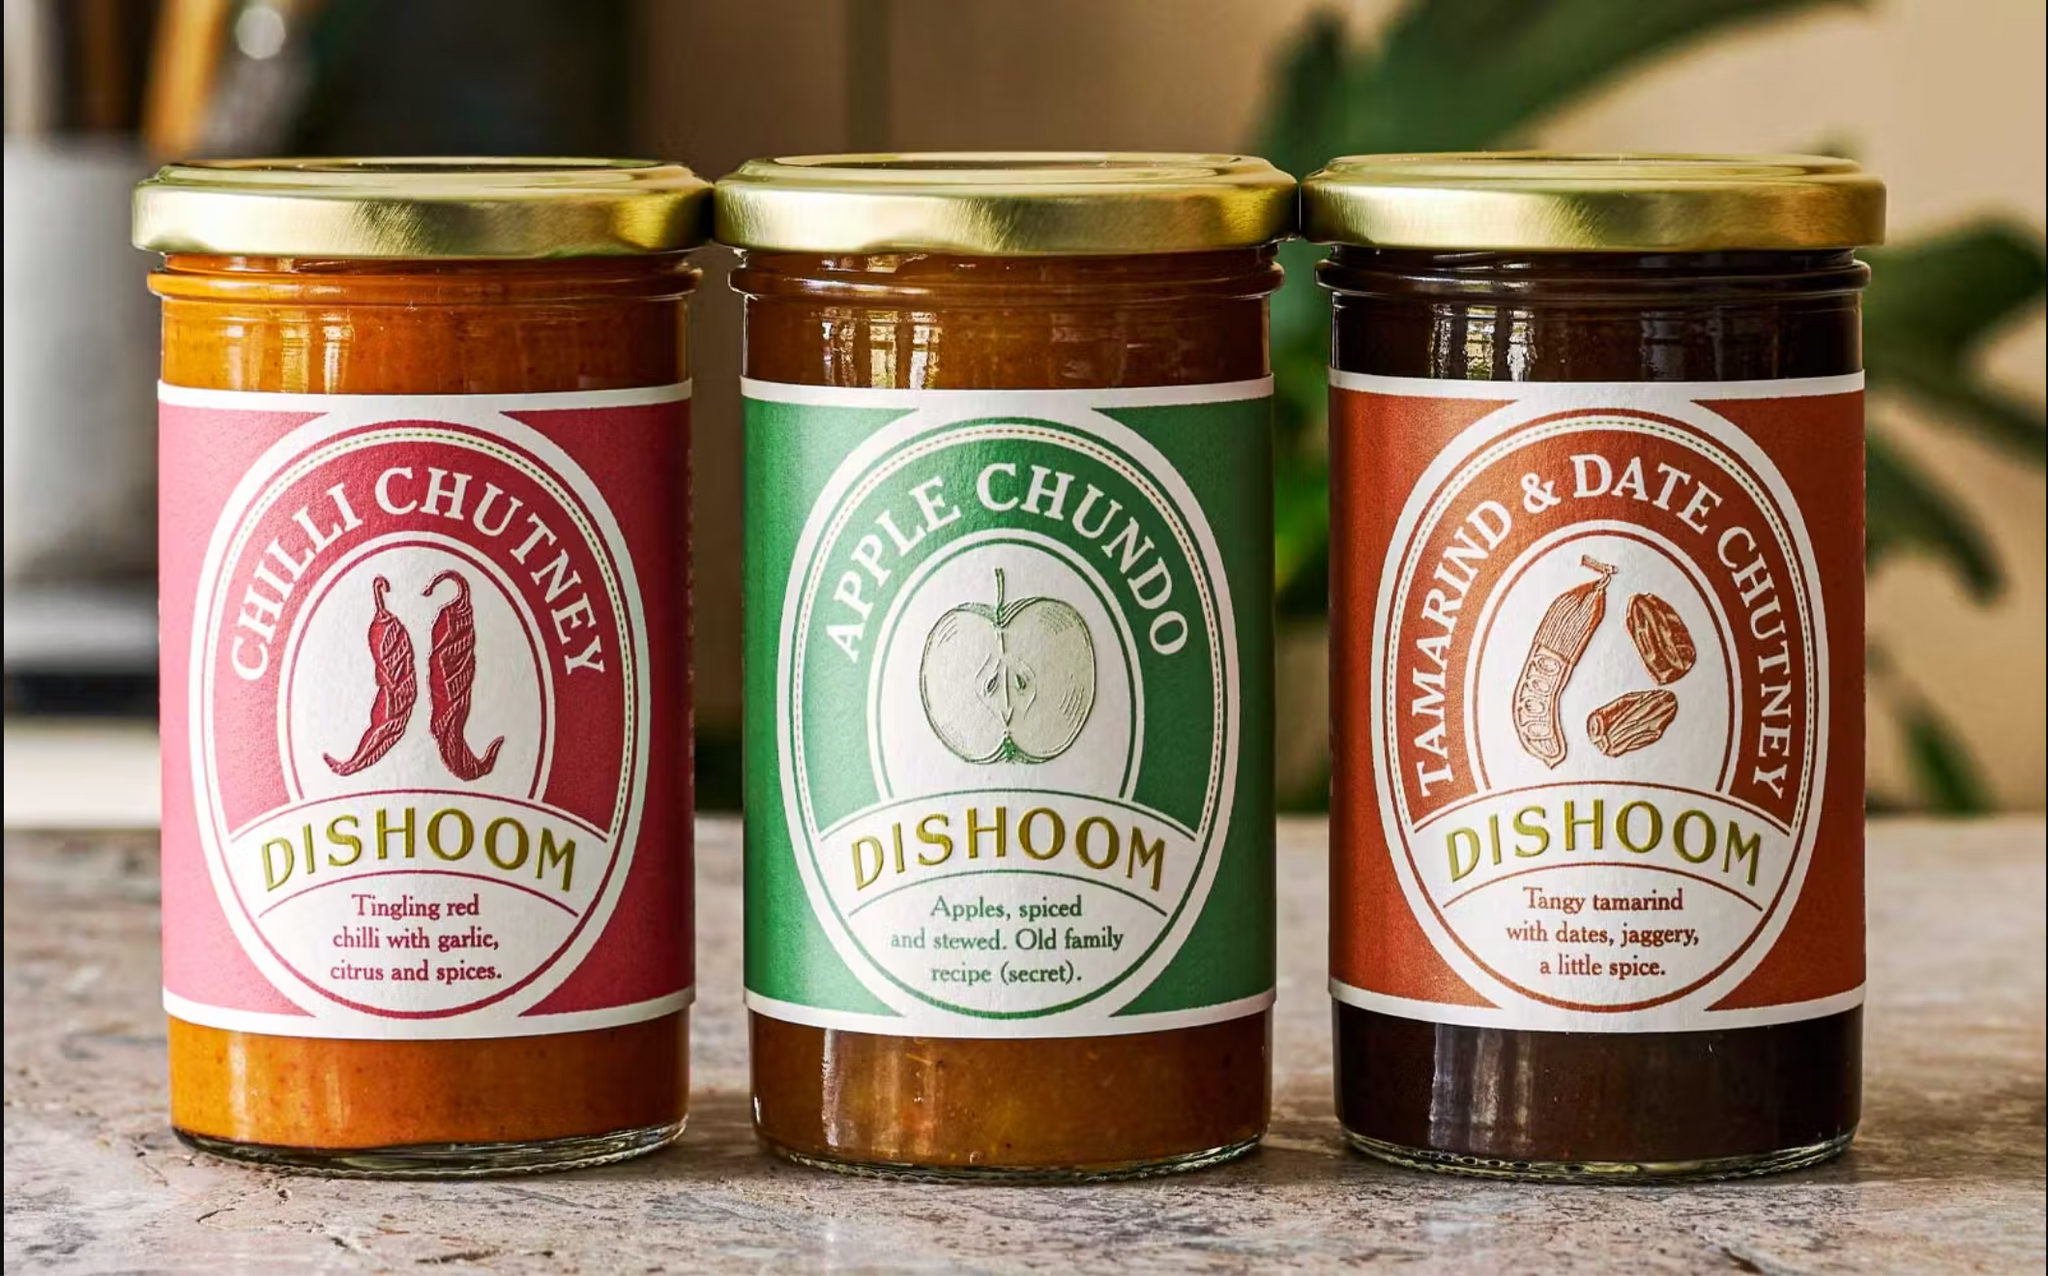 Three Dishoom chutneys lined up left to right: chilli, apple and tamarind and date